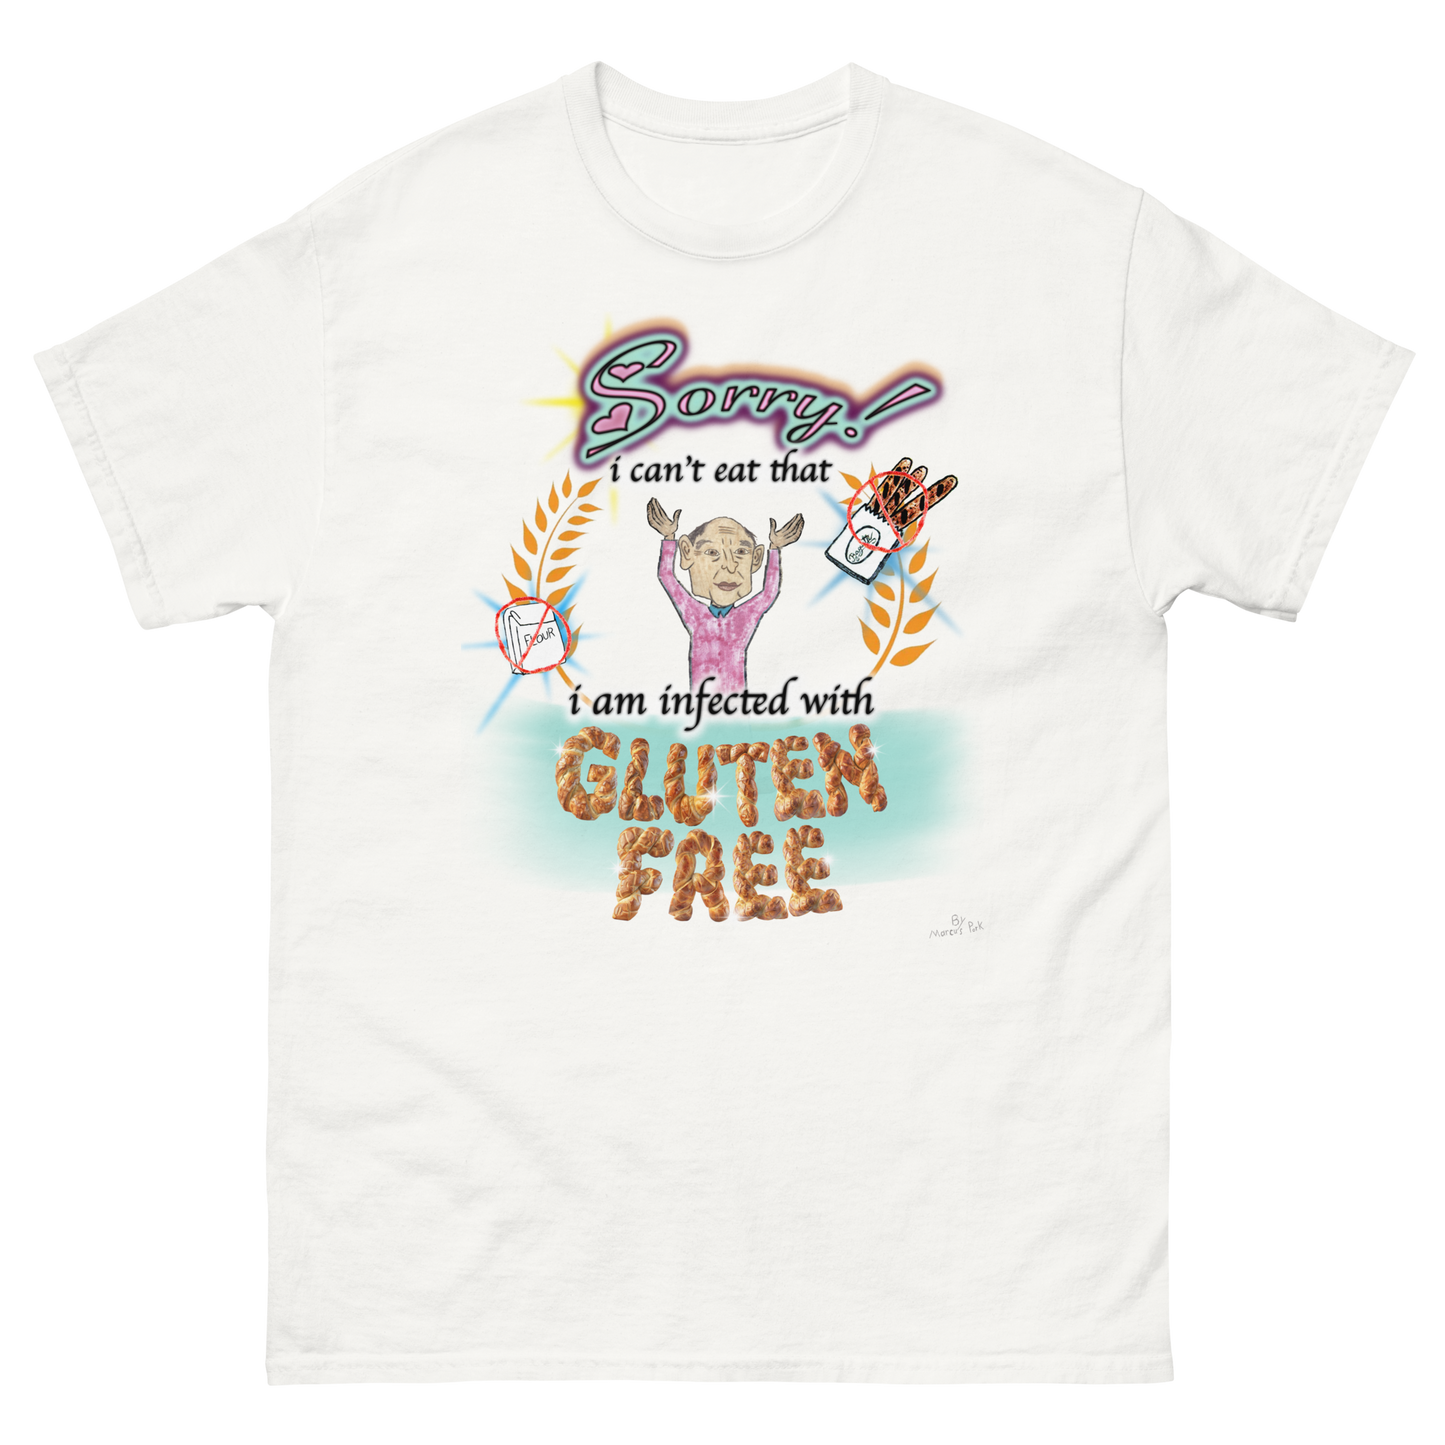 Infected with Gluten Free T-Shirt (Jr.'s Design)